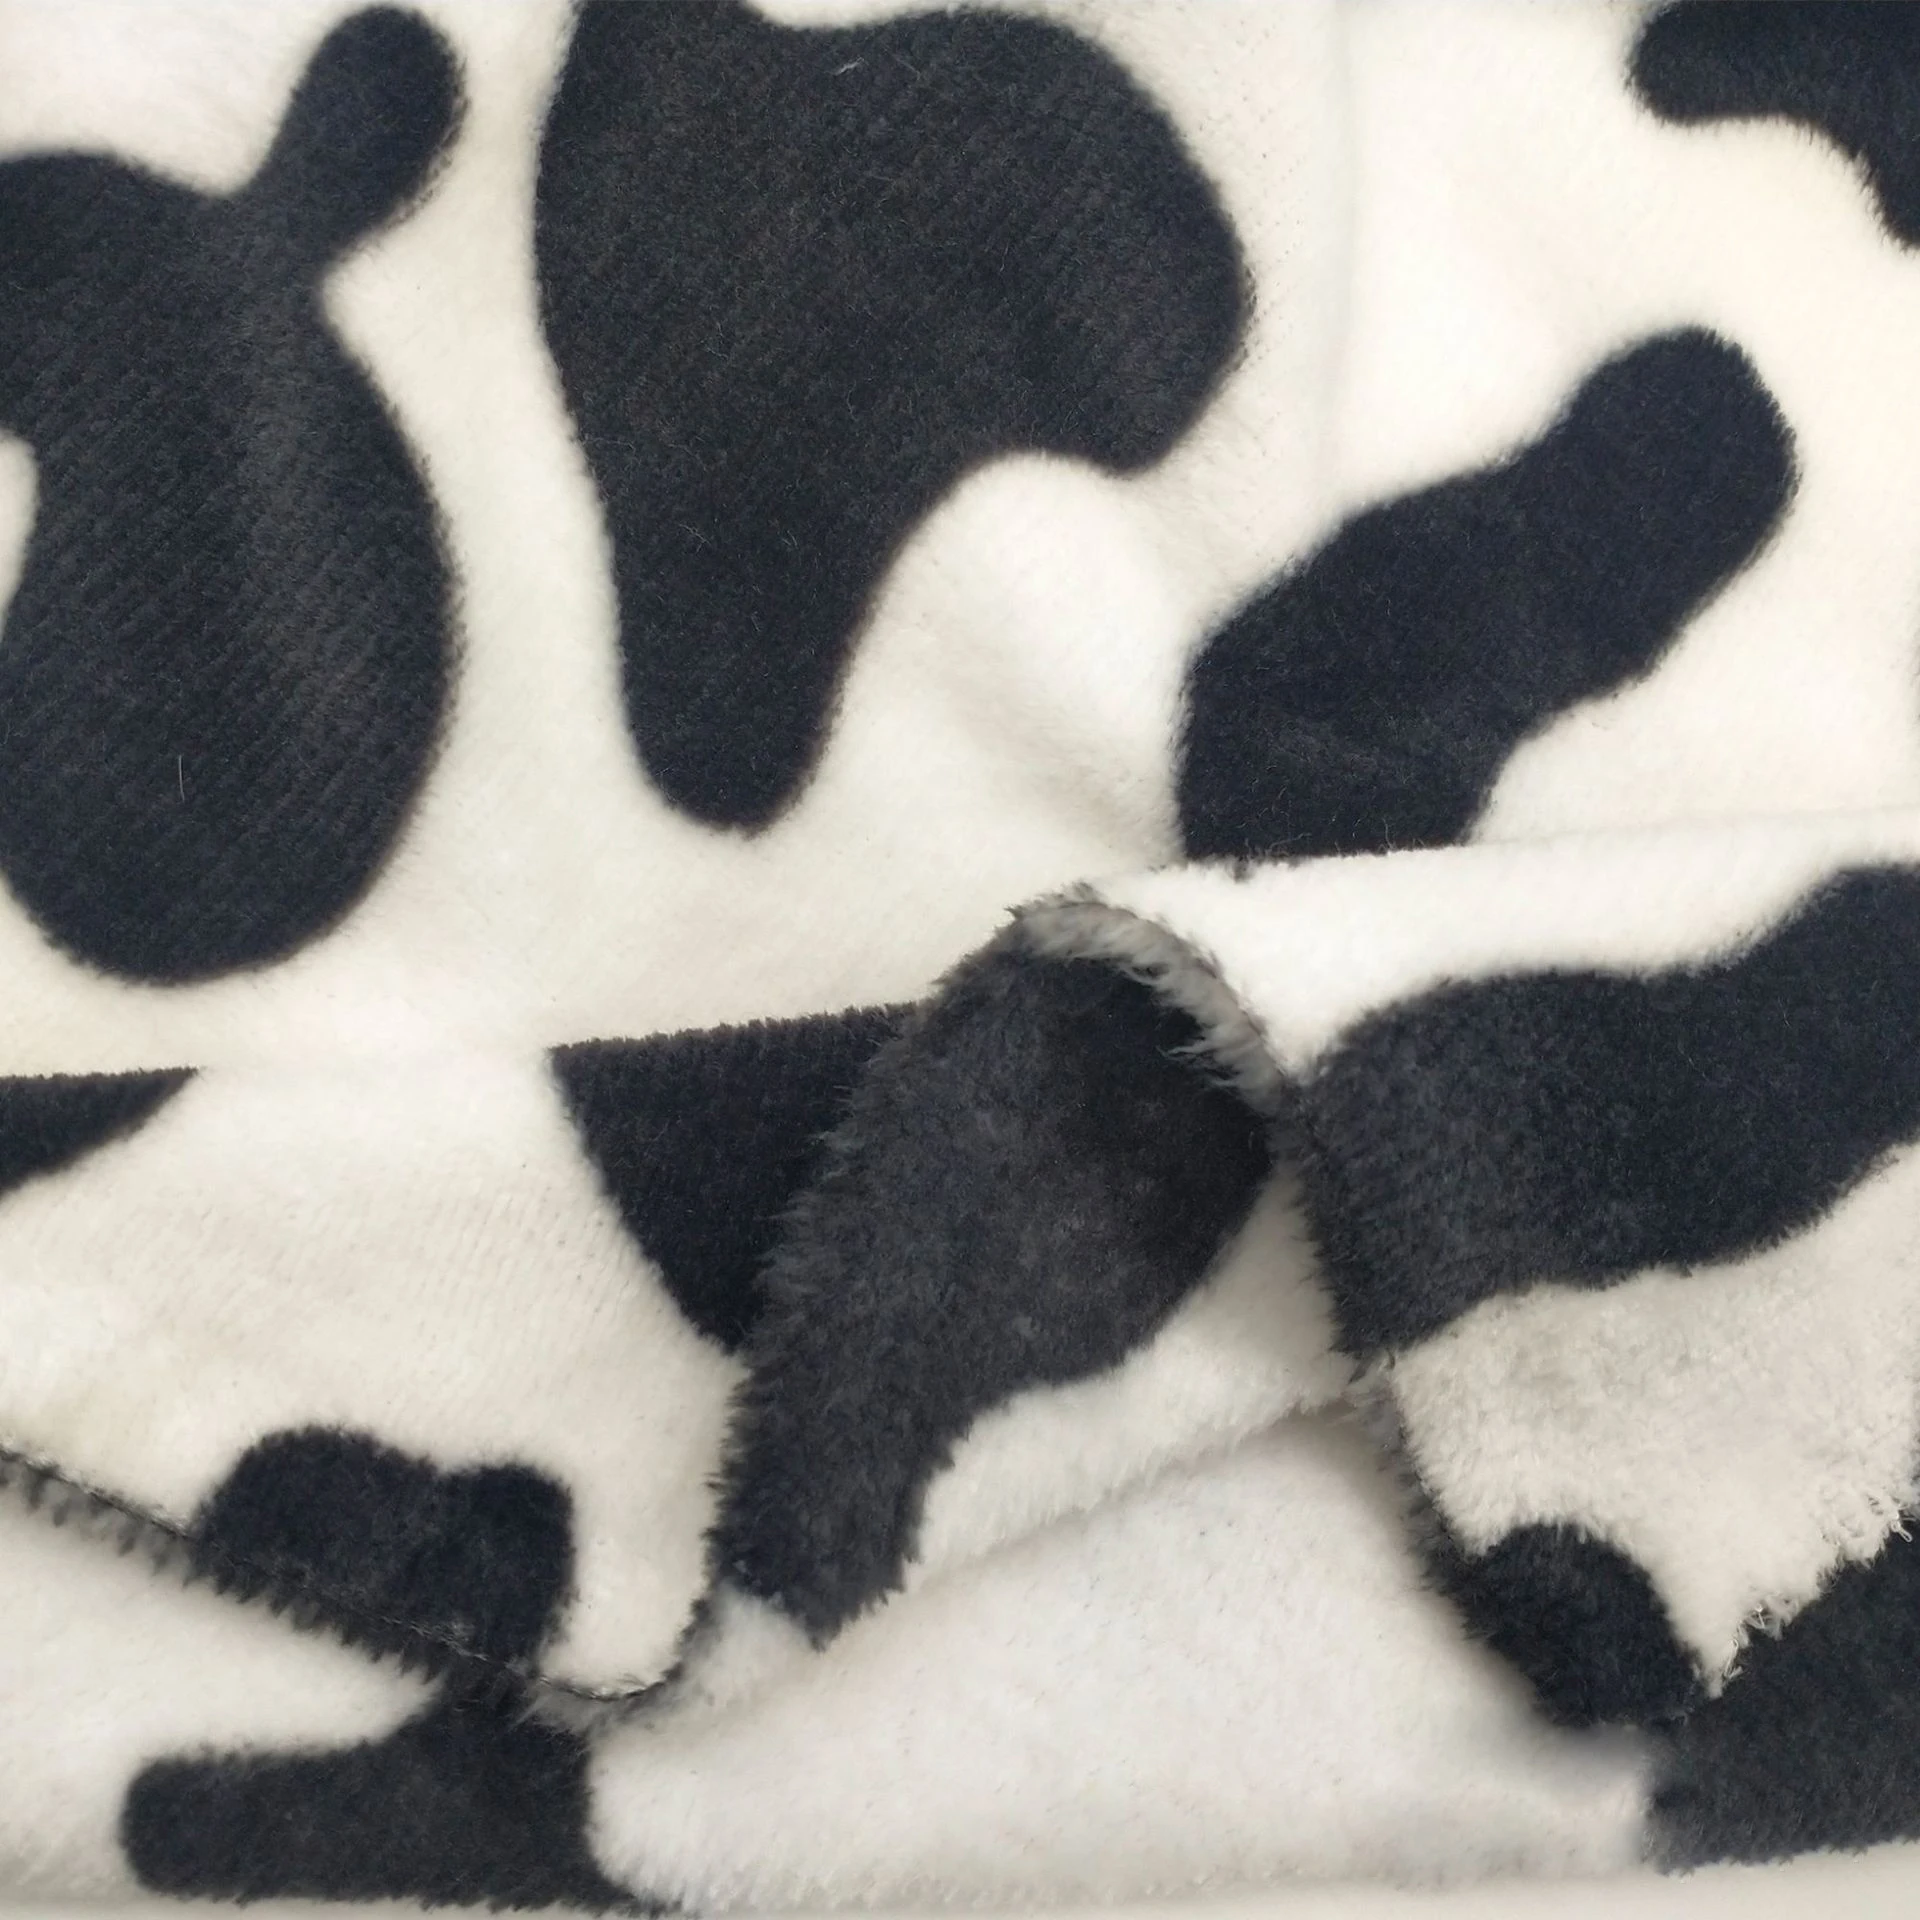 New design double-sided flannel cows print fleece fabric 220-280g for blankets